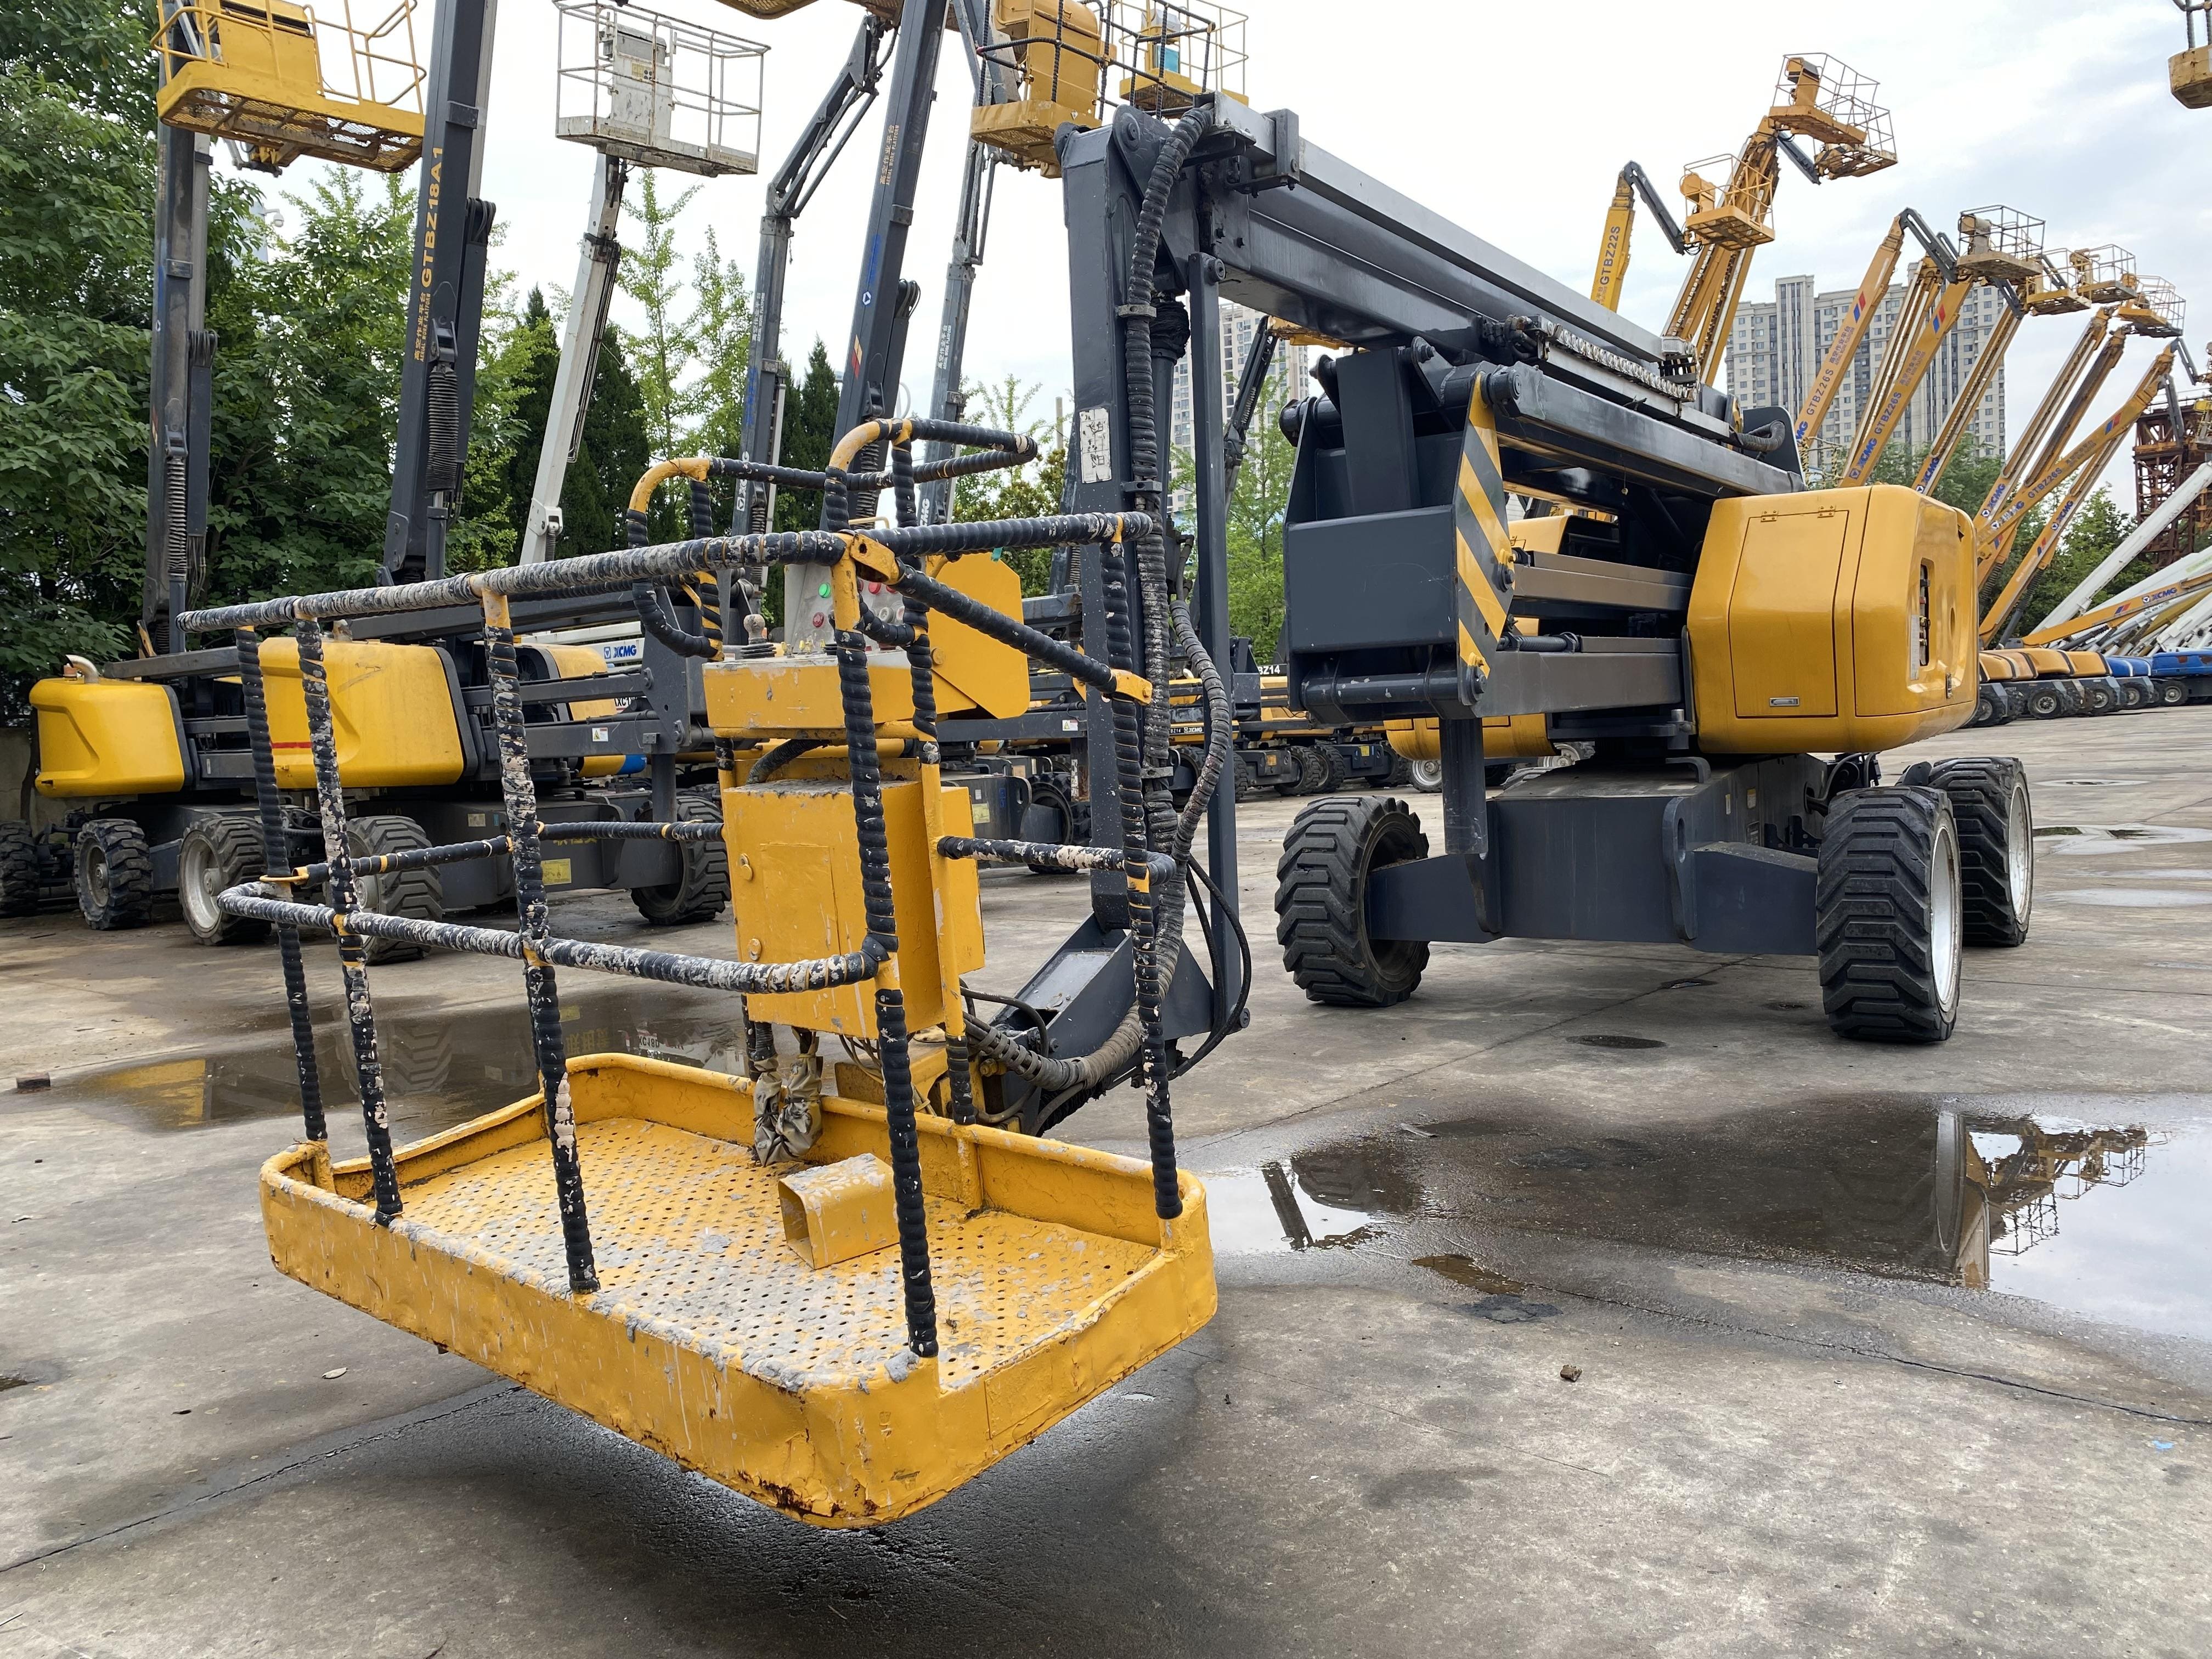 XCMG Used Articulated Boom Lift GTBZ18A1